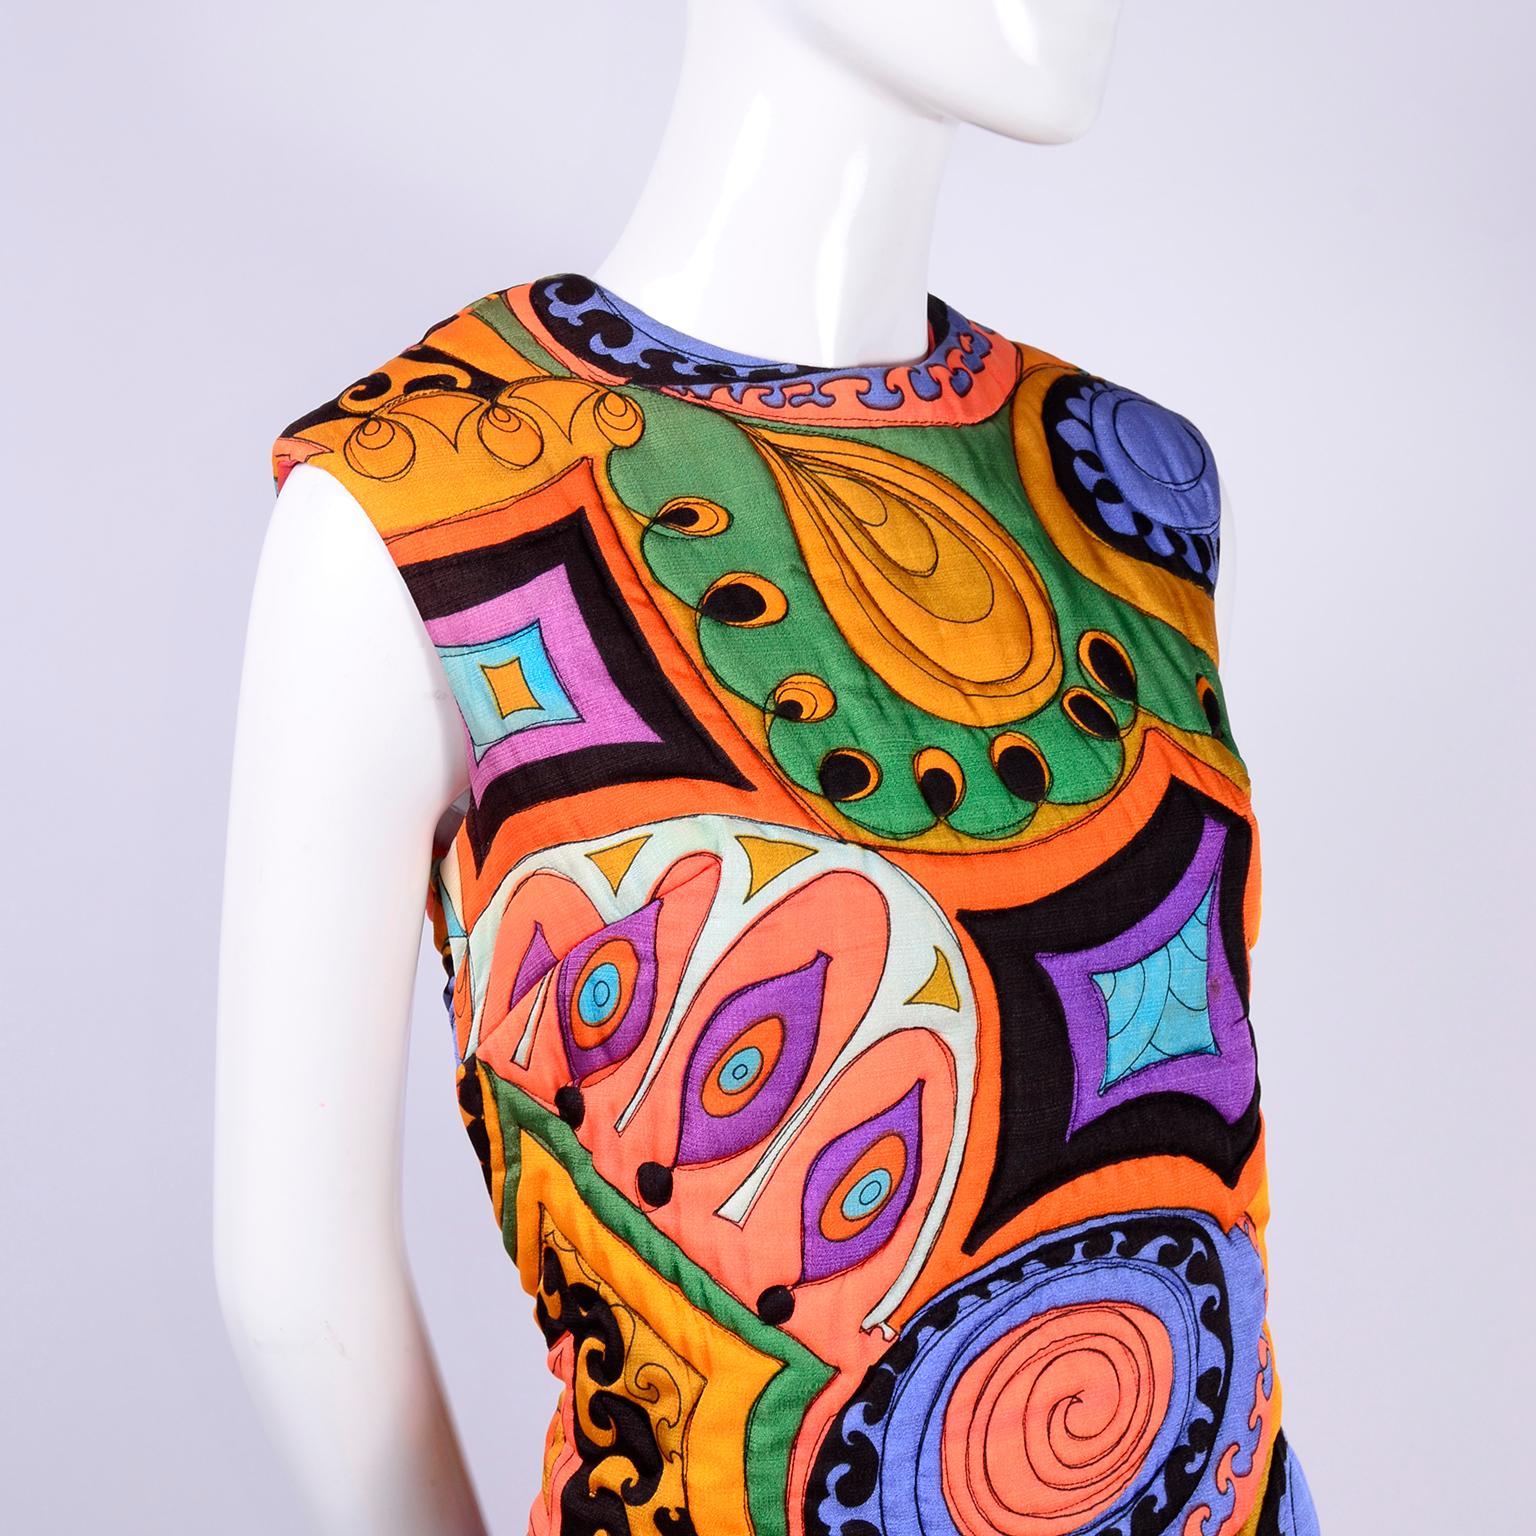 This stunning vintage Dynasty dress was made in Hong Kong in the late 1960's.  The dress is sleeveless and was meant to be worn over trousers or slacks and you can pair it with any pair of slim black pants or loose silk pajama style pants.  The long